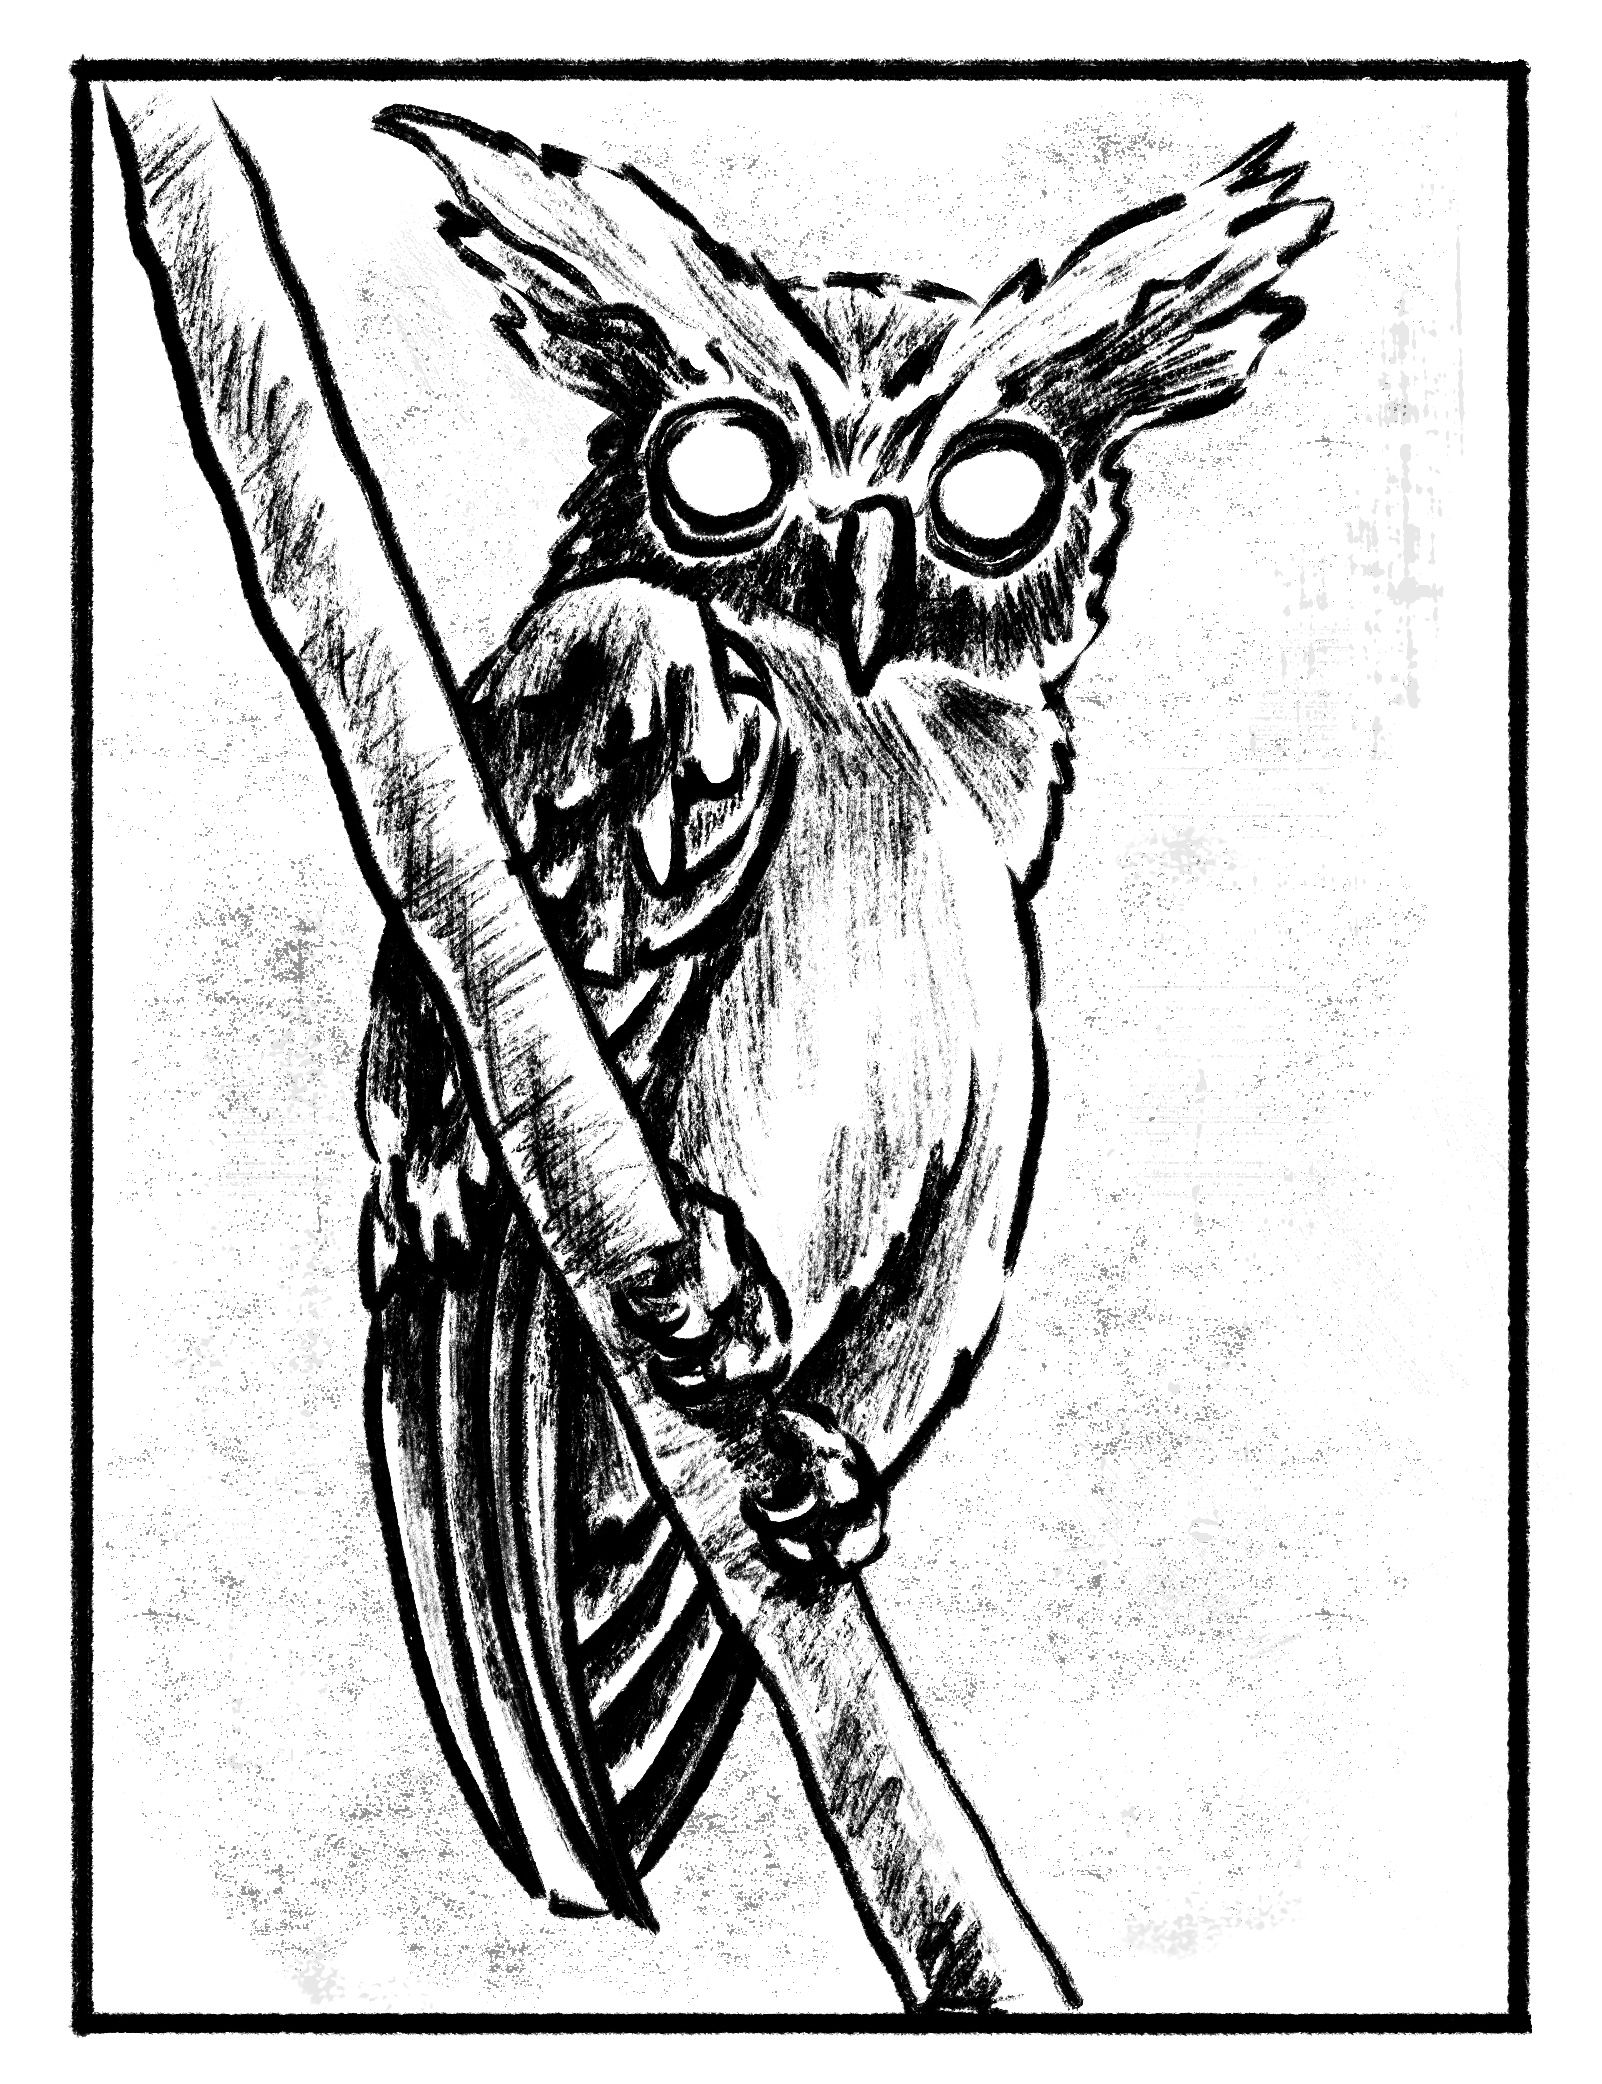 a sketchy digital drawing of a crested owl